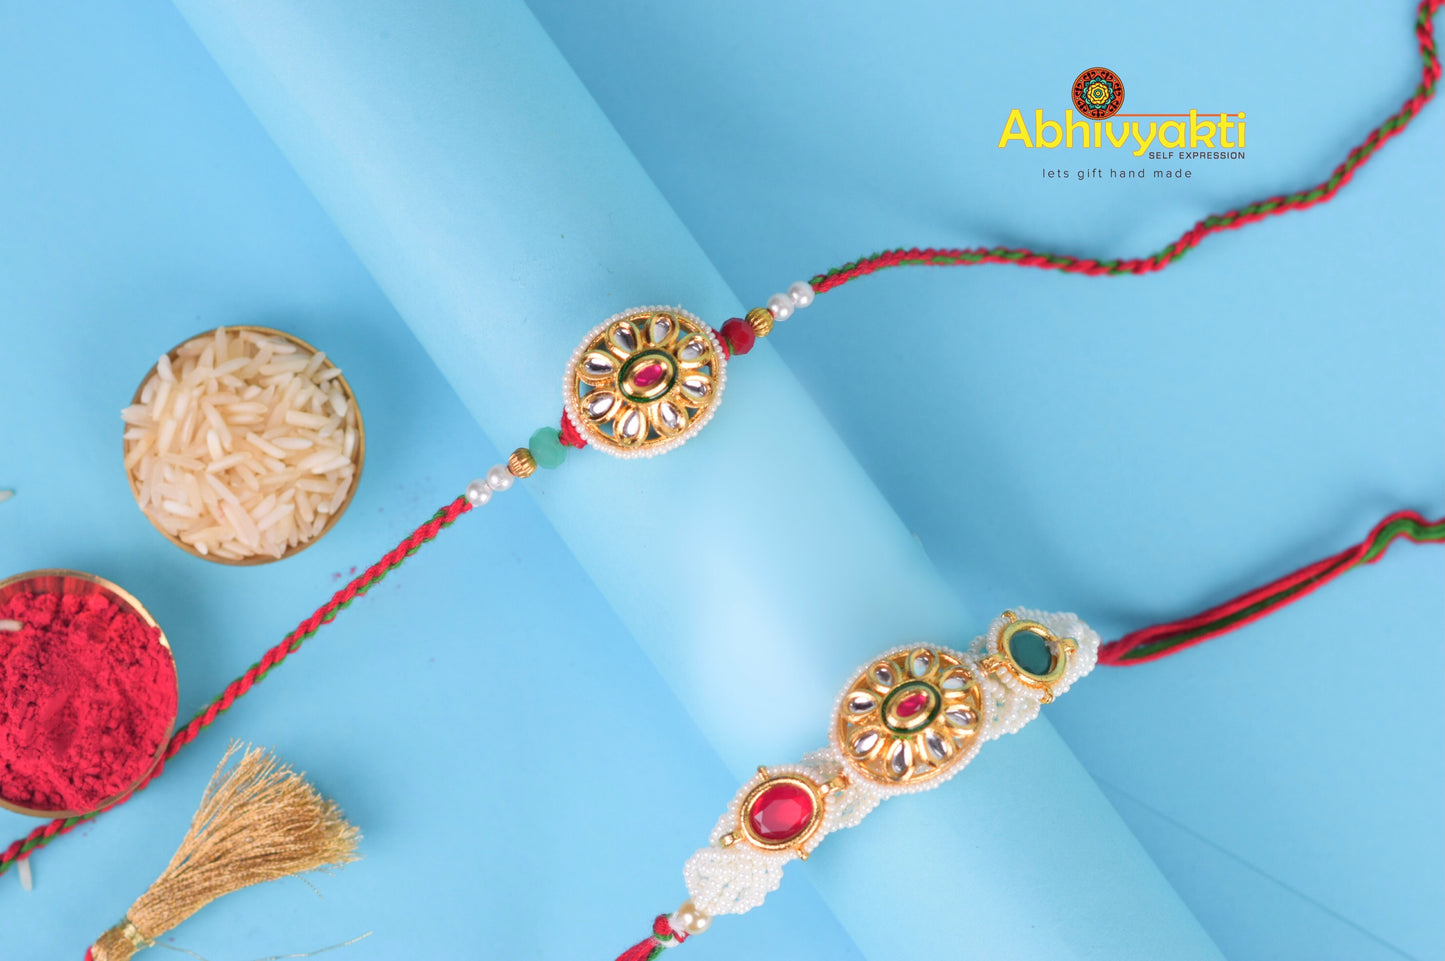 Two rakhi's with gold and red beads, rakhi lumba design with beautiful beads and stones.